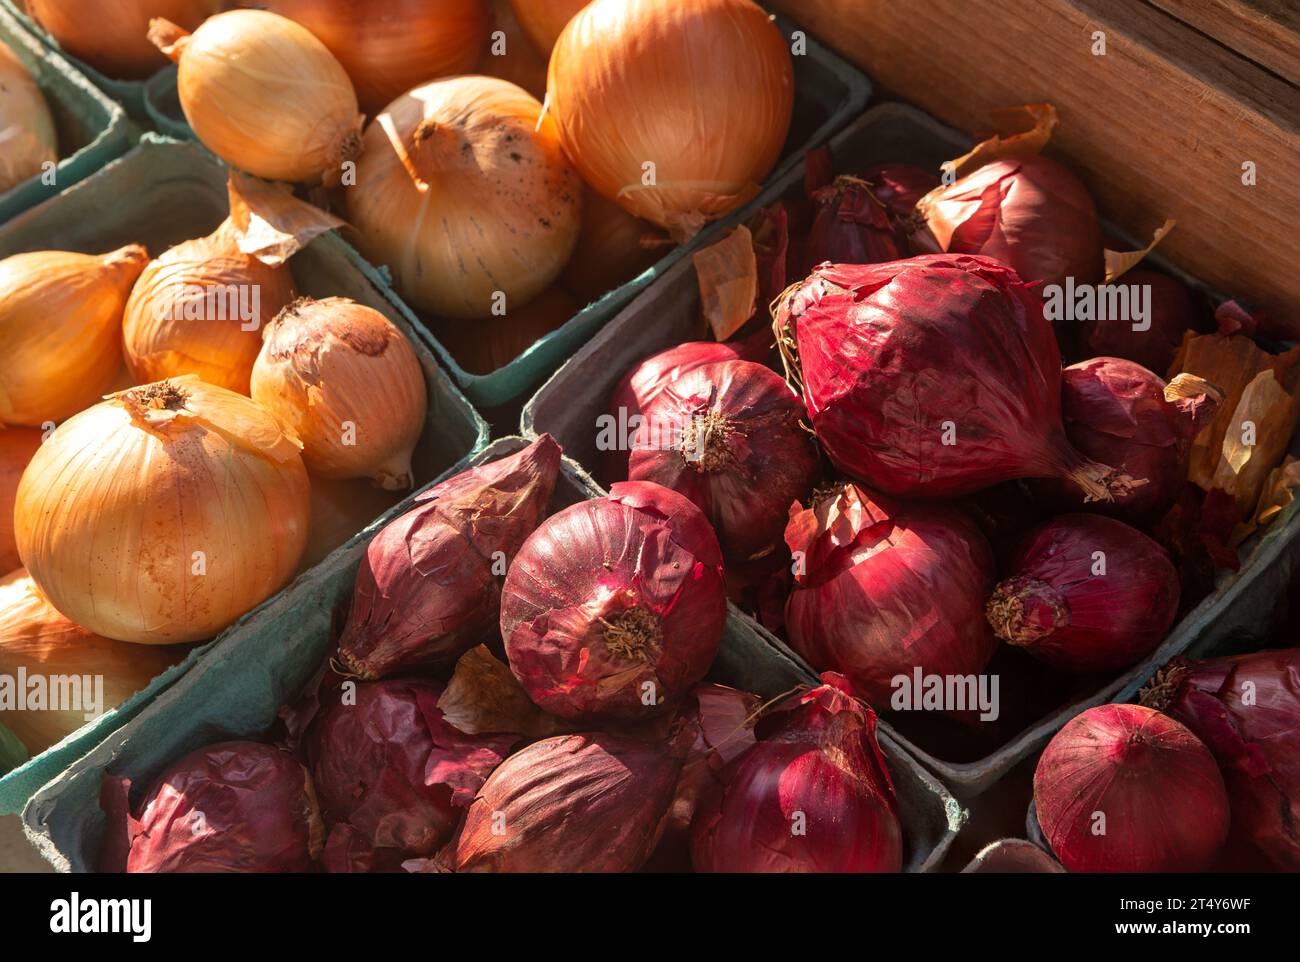 Early morning light illuminates red and yellow onions at a local outdoor market Stock Photo